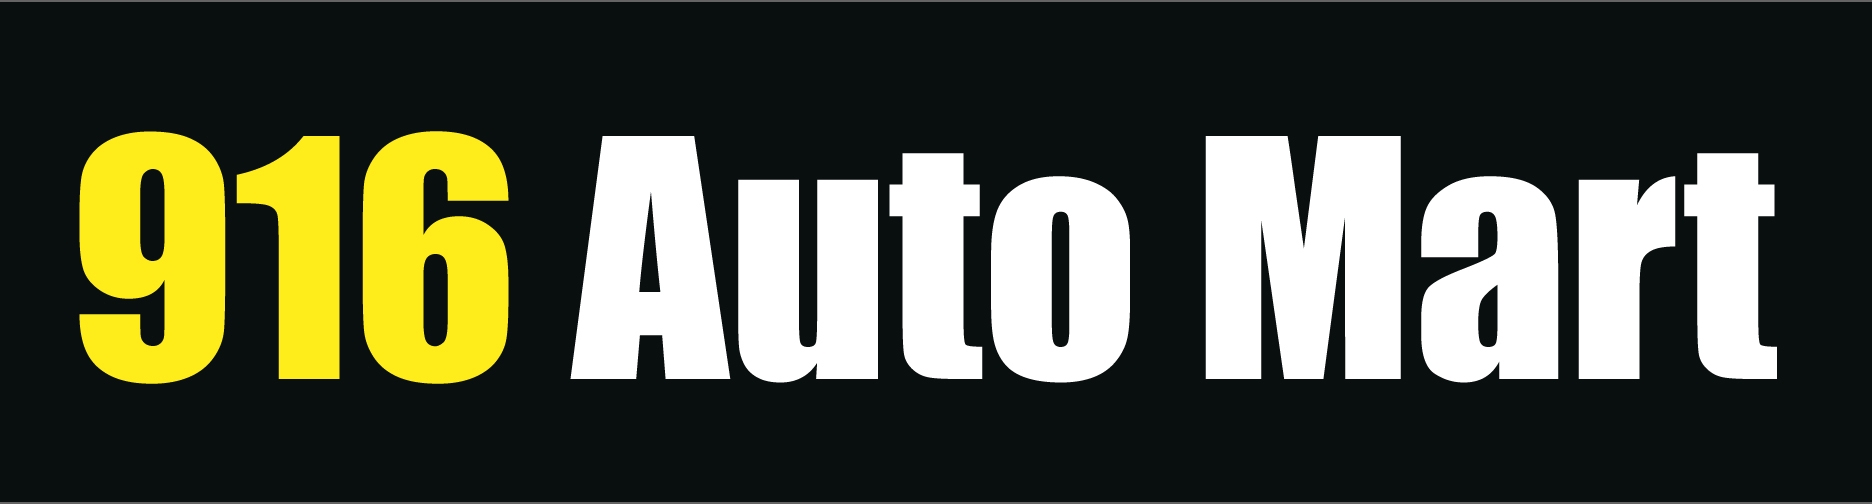 916 Auto Mart Expands Services to Assist Bad Credit Buyers in Sacramento